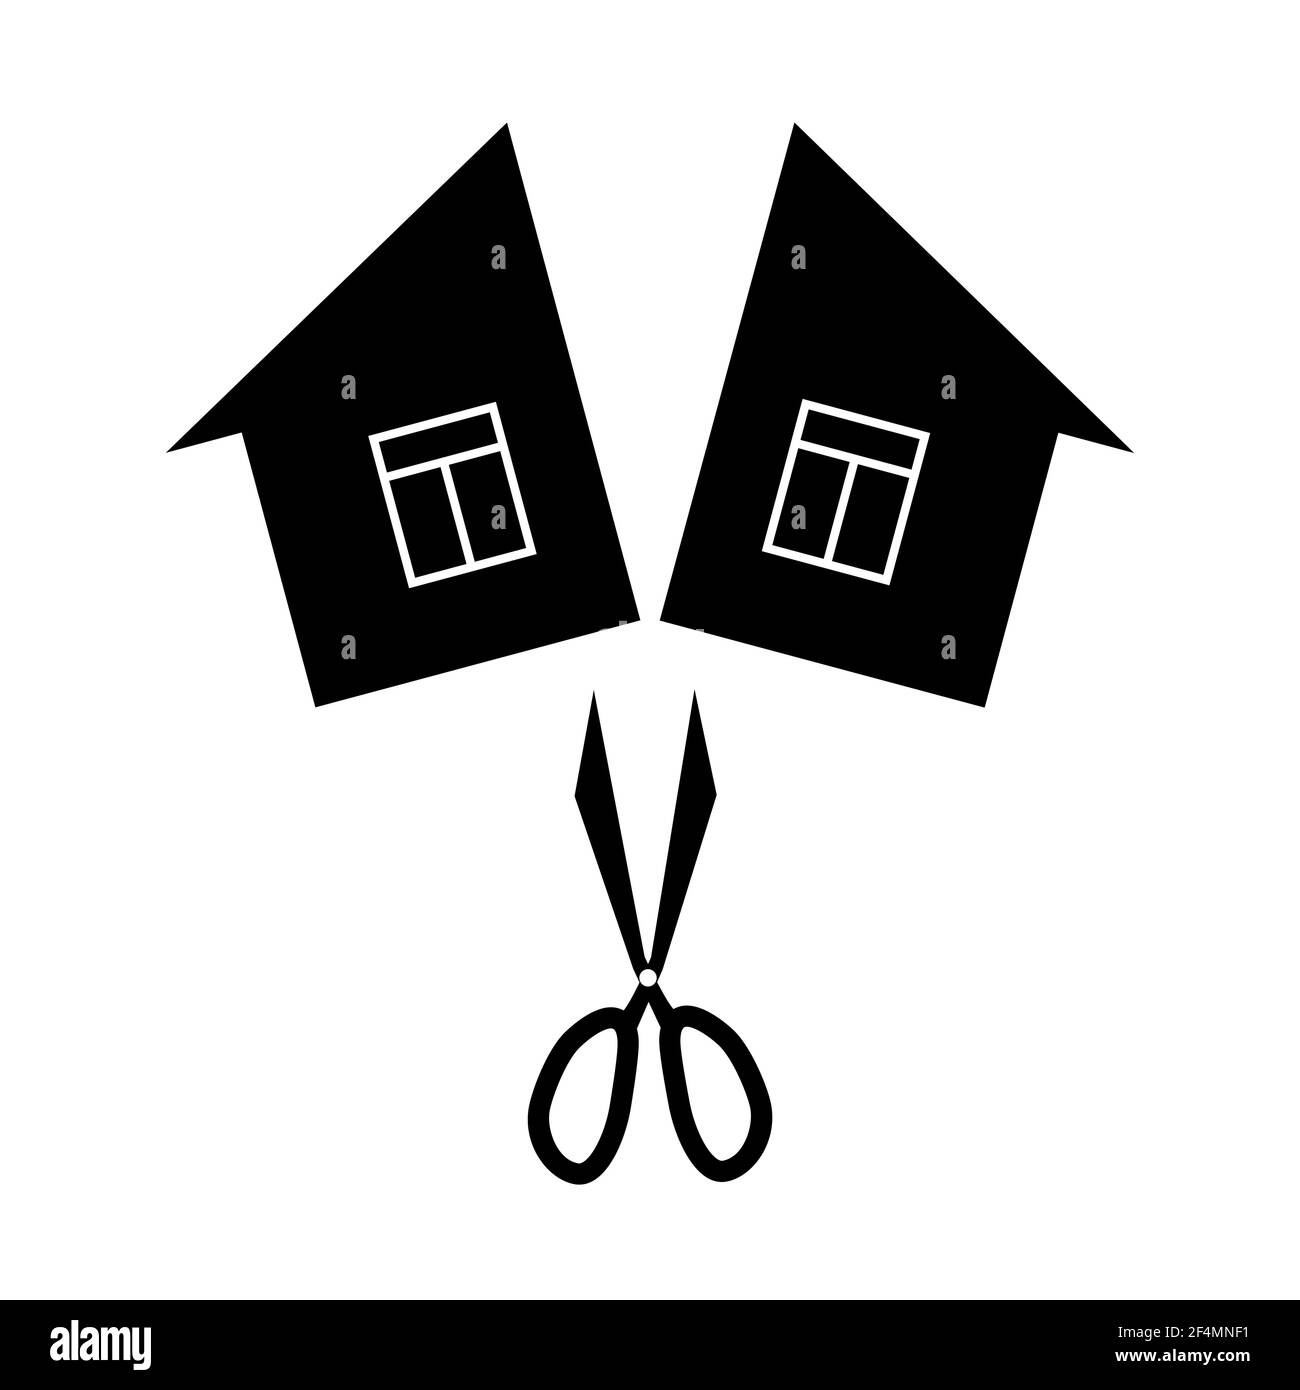 Concept of divorce and division of property. Black monochrome vector illustration house cut in half. Stock Vector